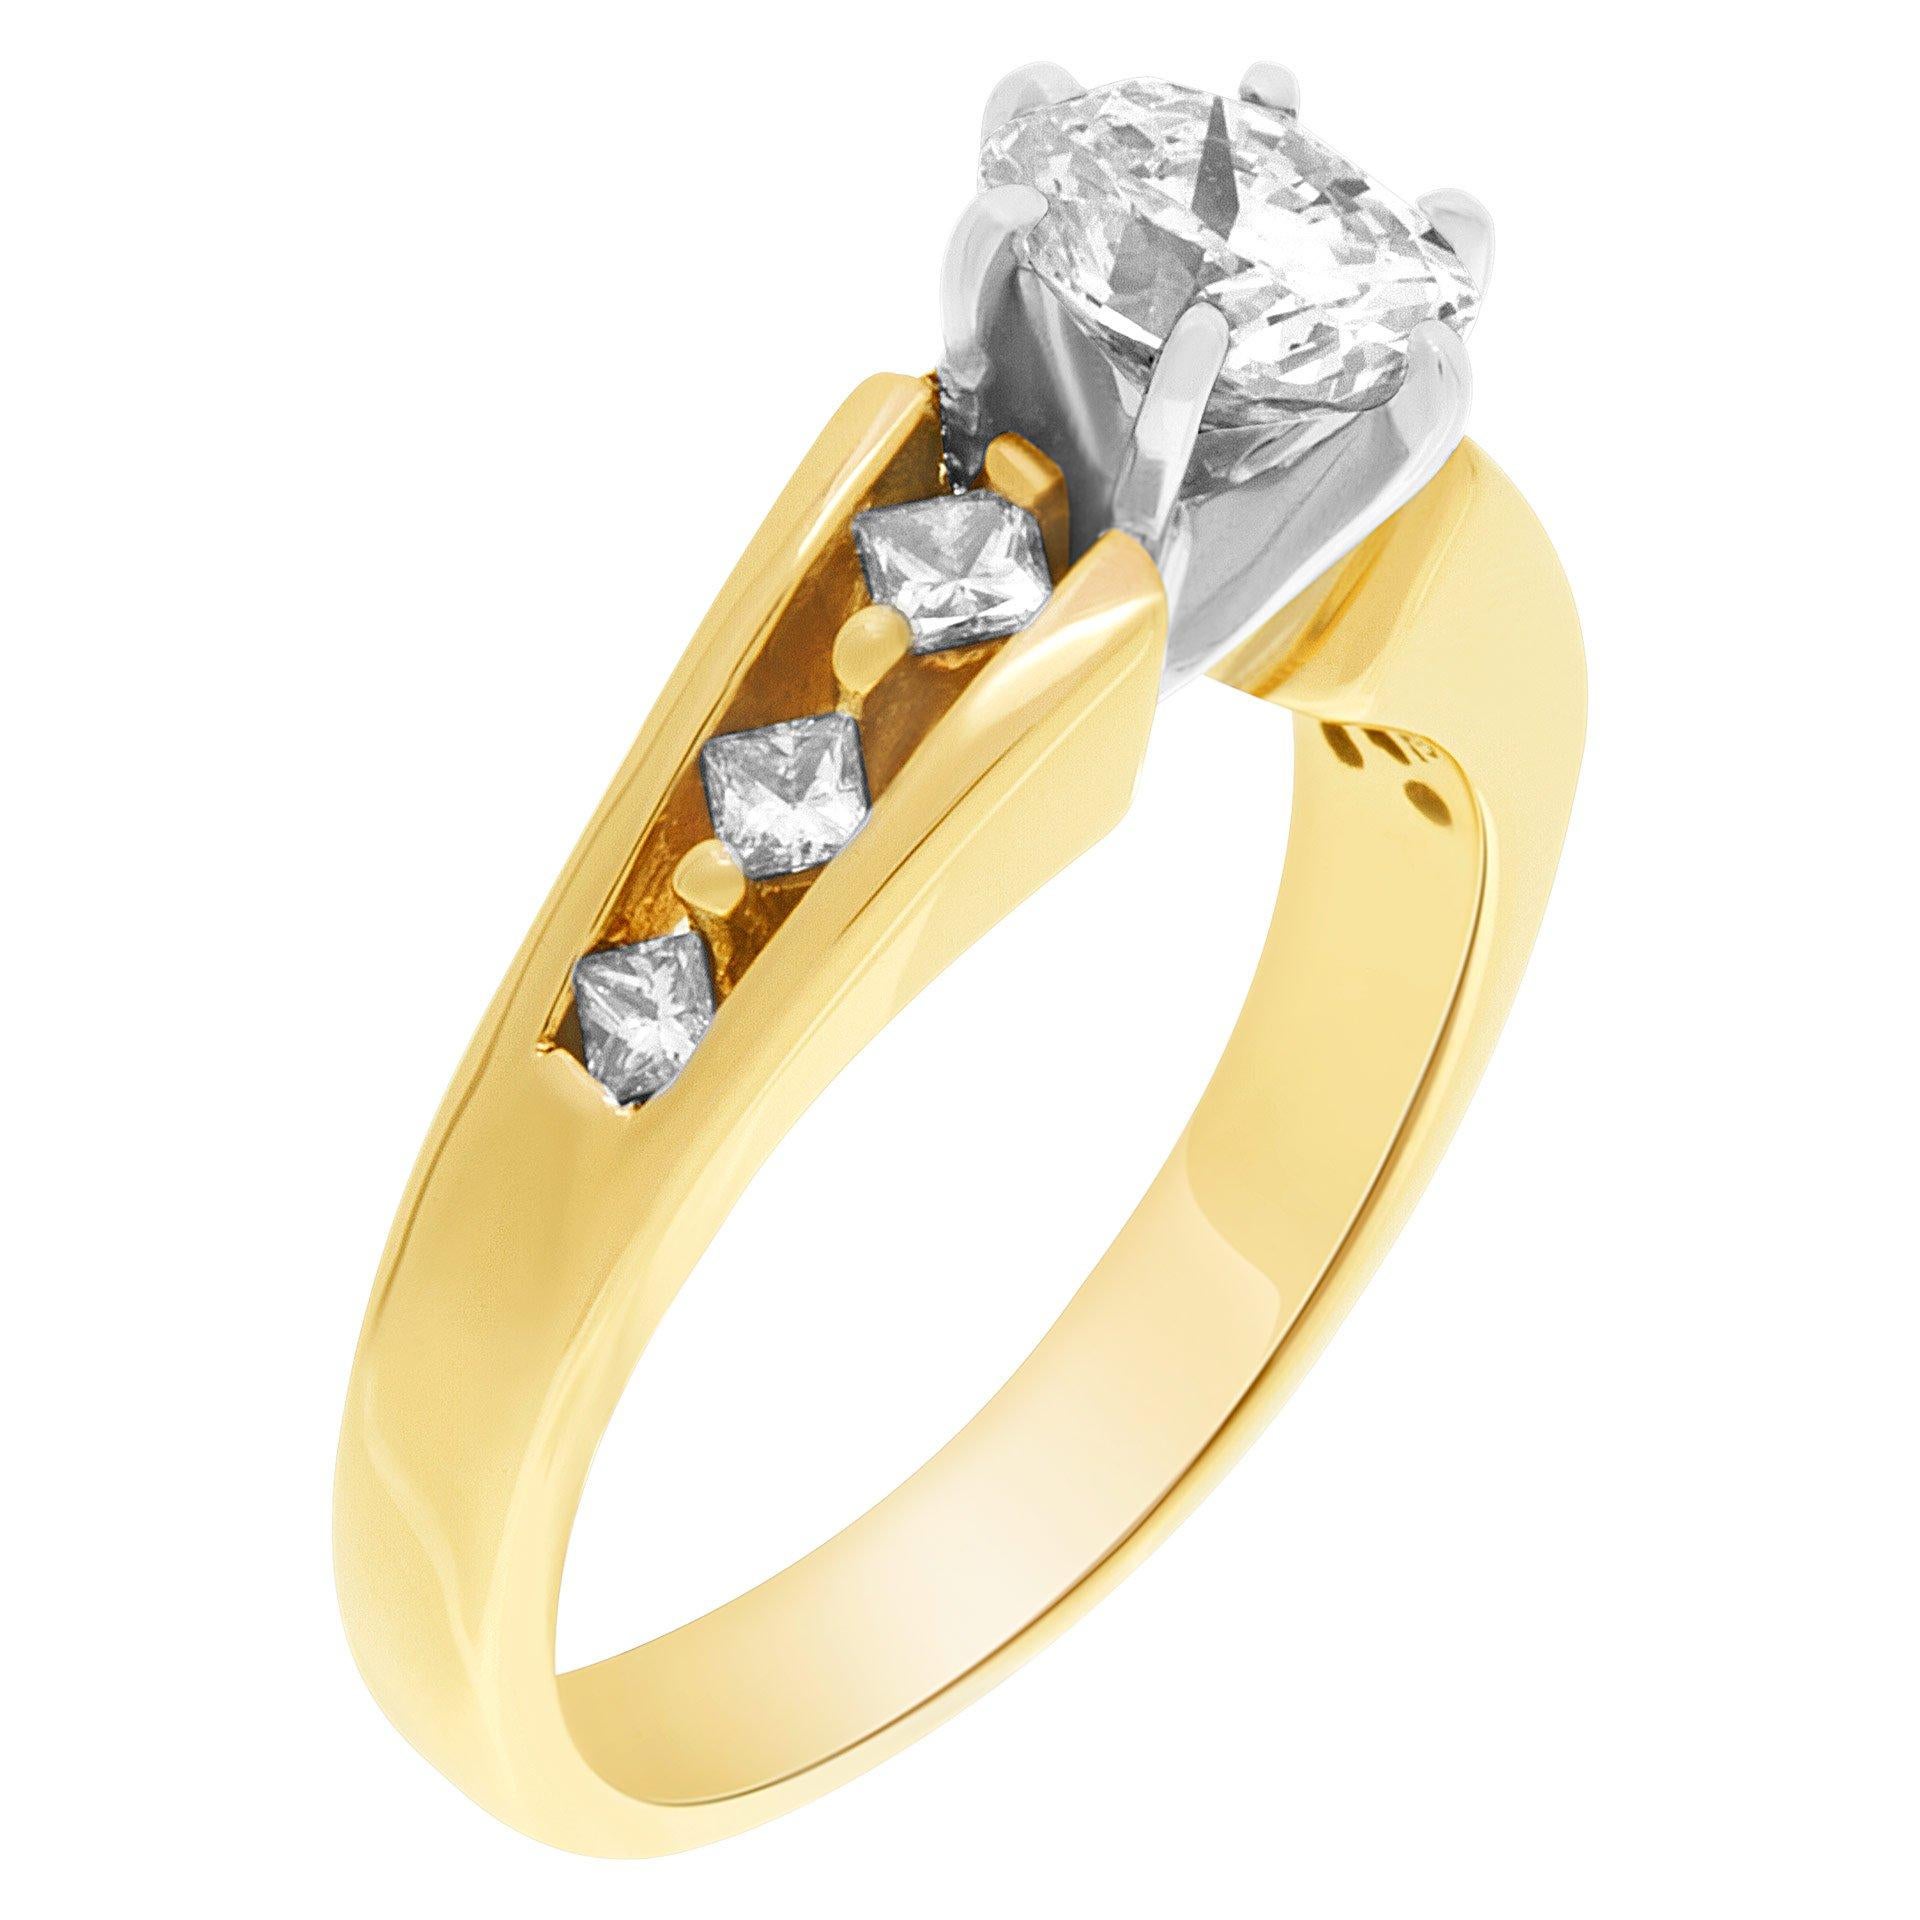 GIA certified cushion brilliant cut diamond 0.87 carat (H color, I1 clarity) set in beautiful 14k yellow gold ring with three diamonds on each side. Size 6.

This GIA certified ring is currently size 6 and some items can be sized up or down, please